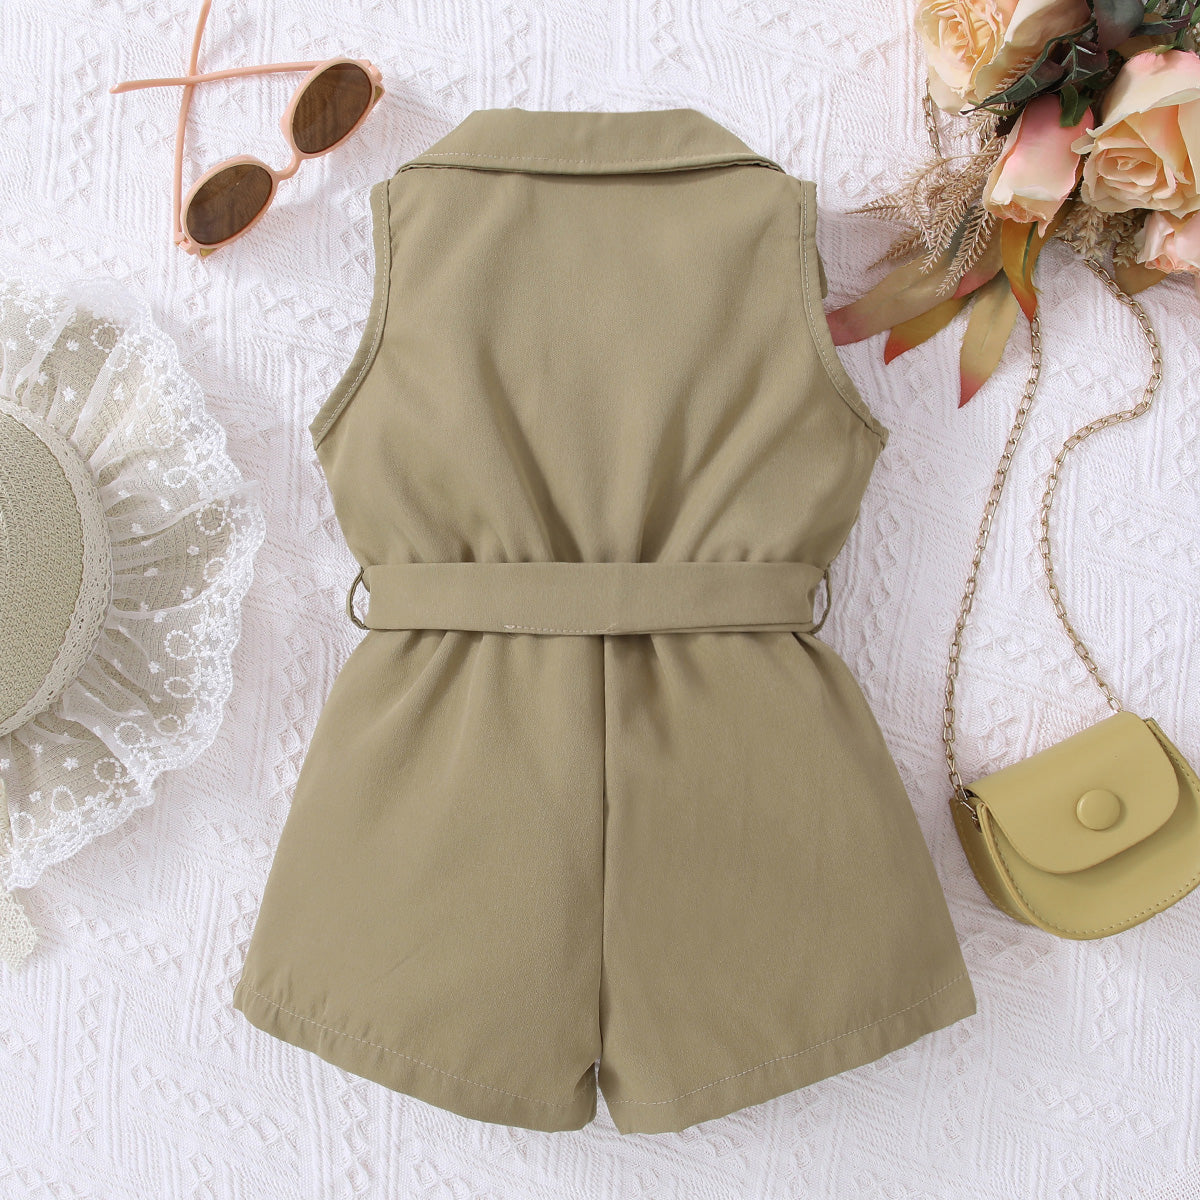 Kids Buttoned Collared Neck Sleeveless Romper